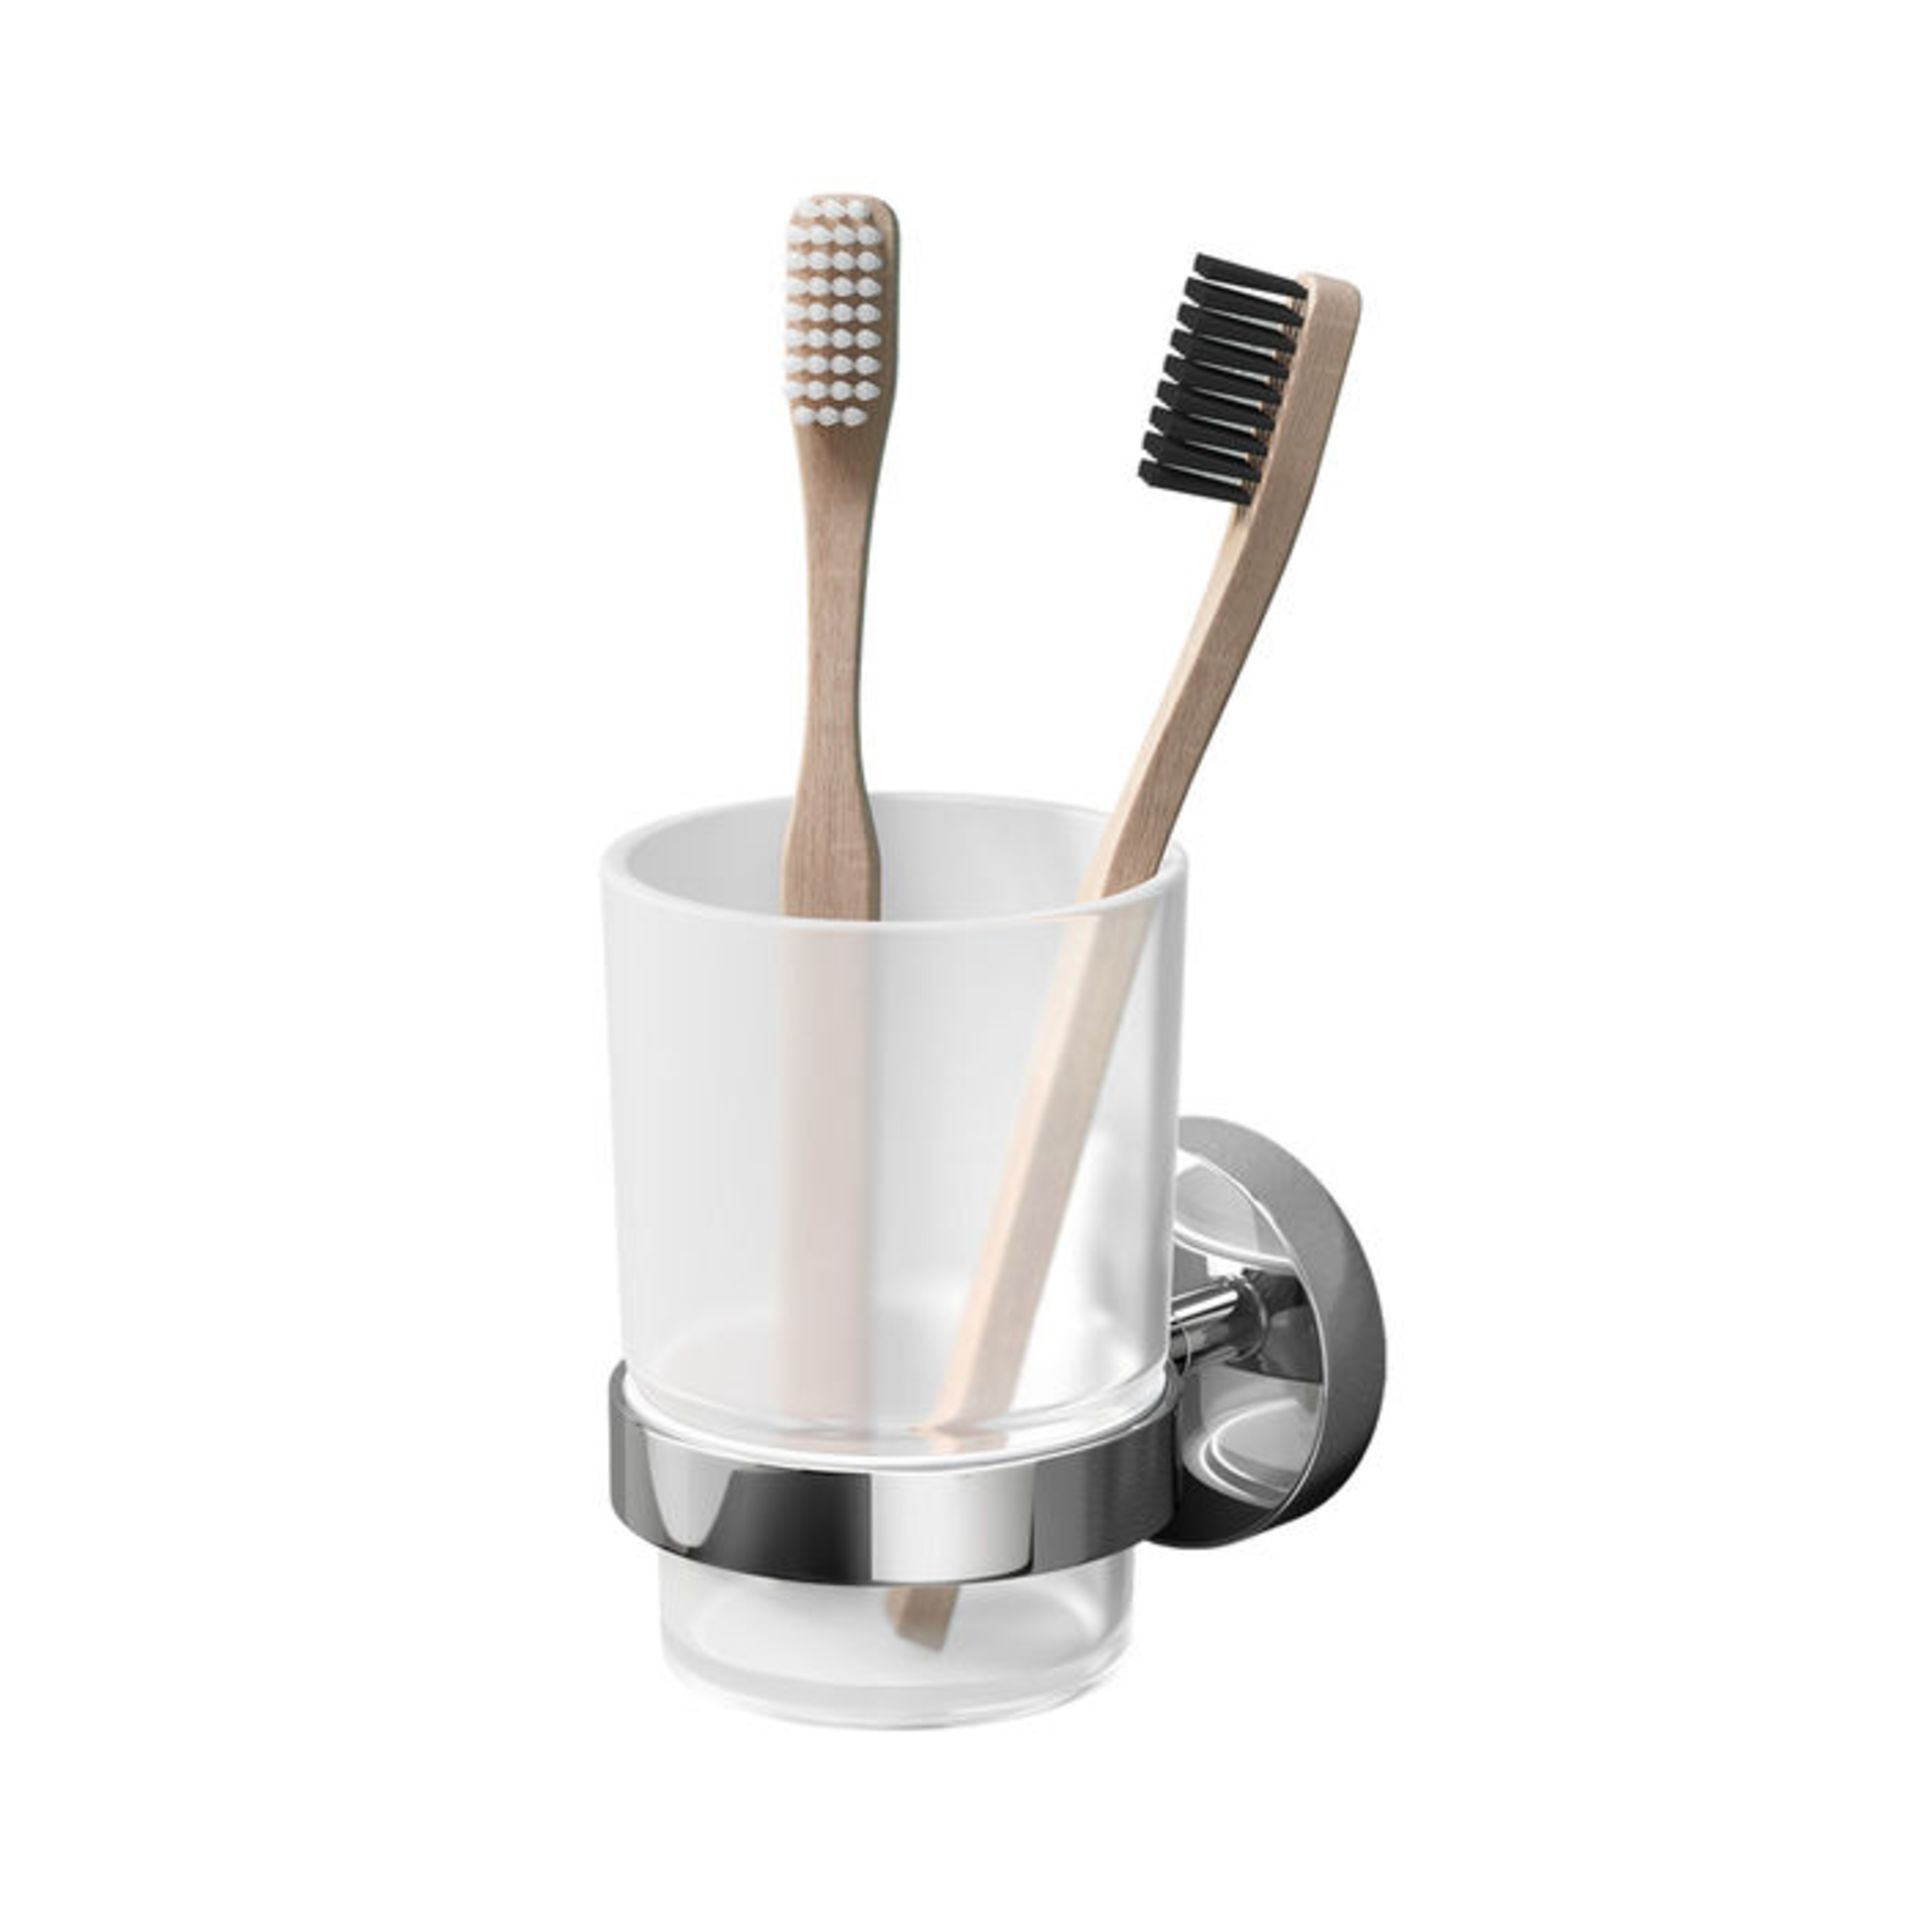 (NF120) Finsbury Tumbler Holder. Completes your bathroom with a little extra functionality and style - Image 2 of 4